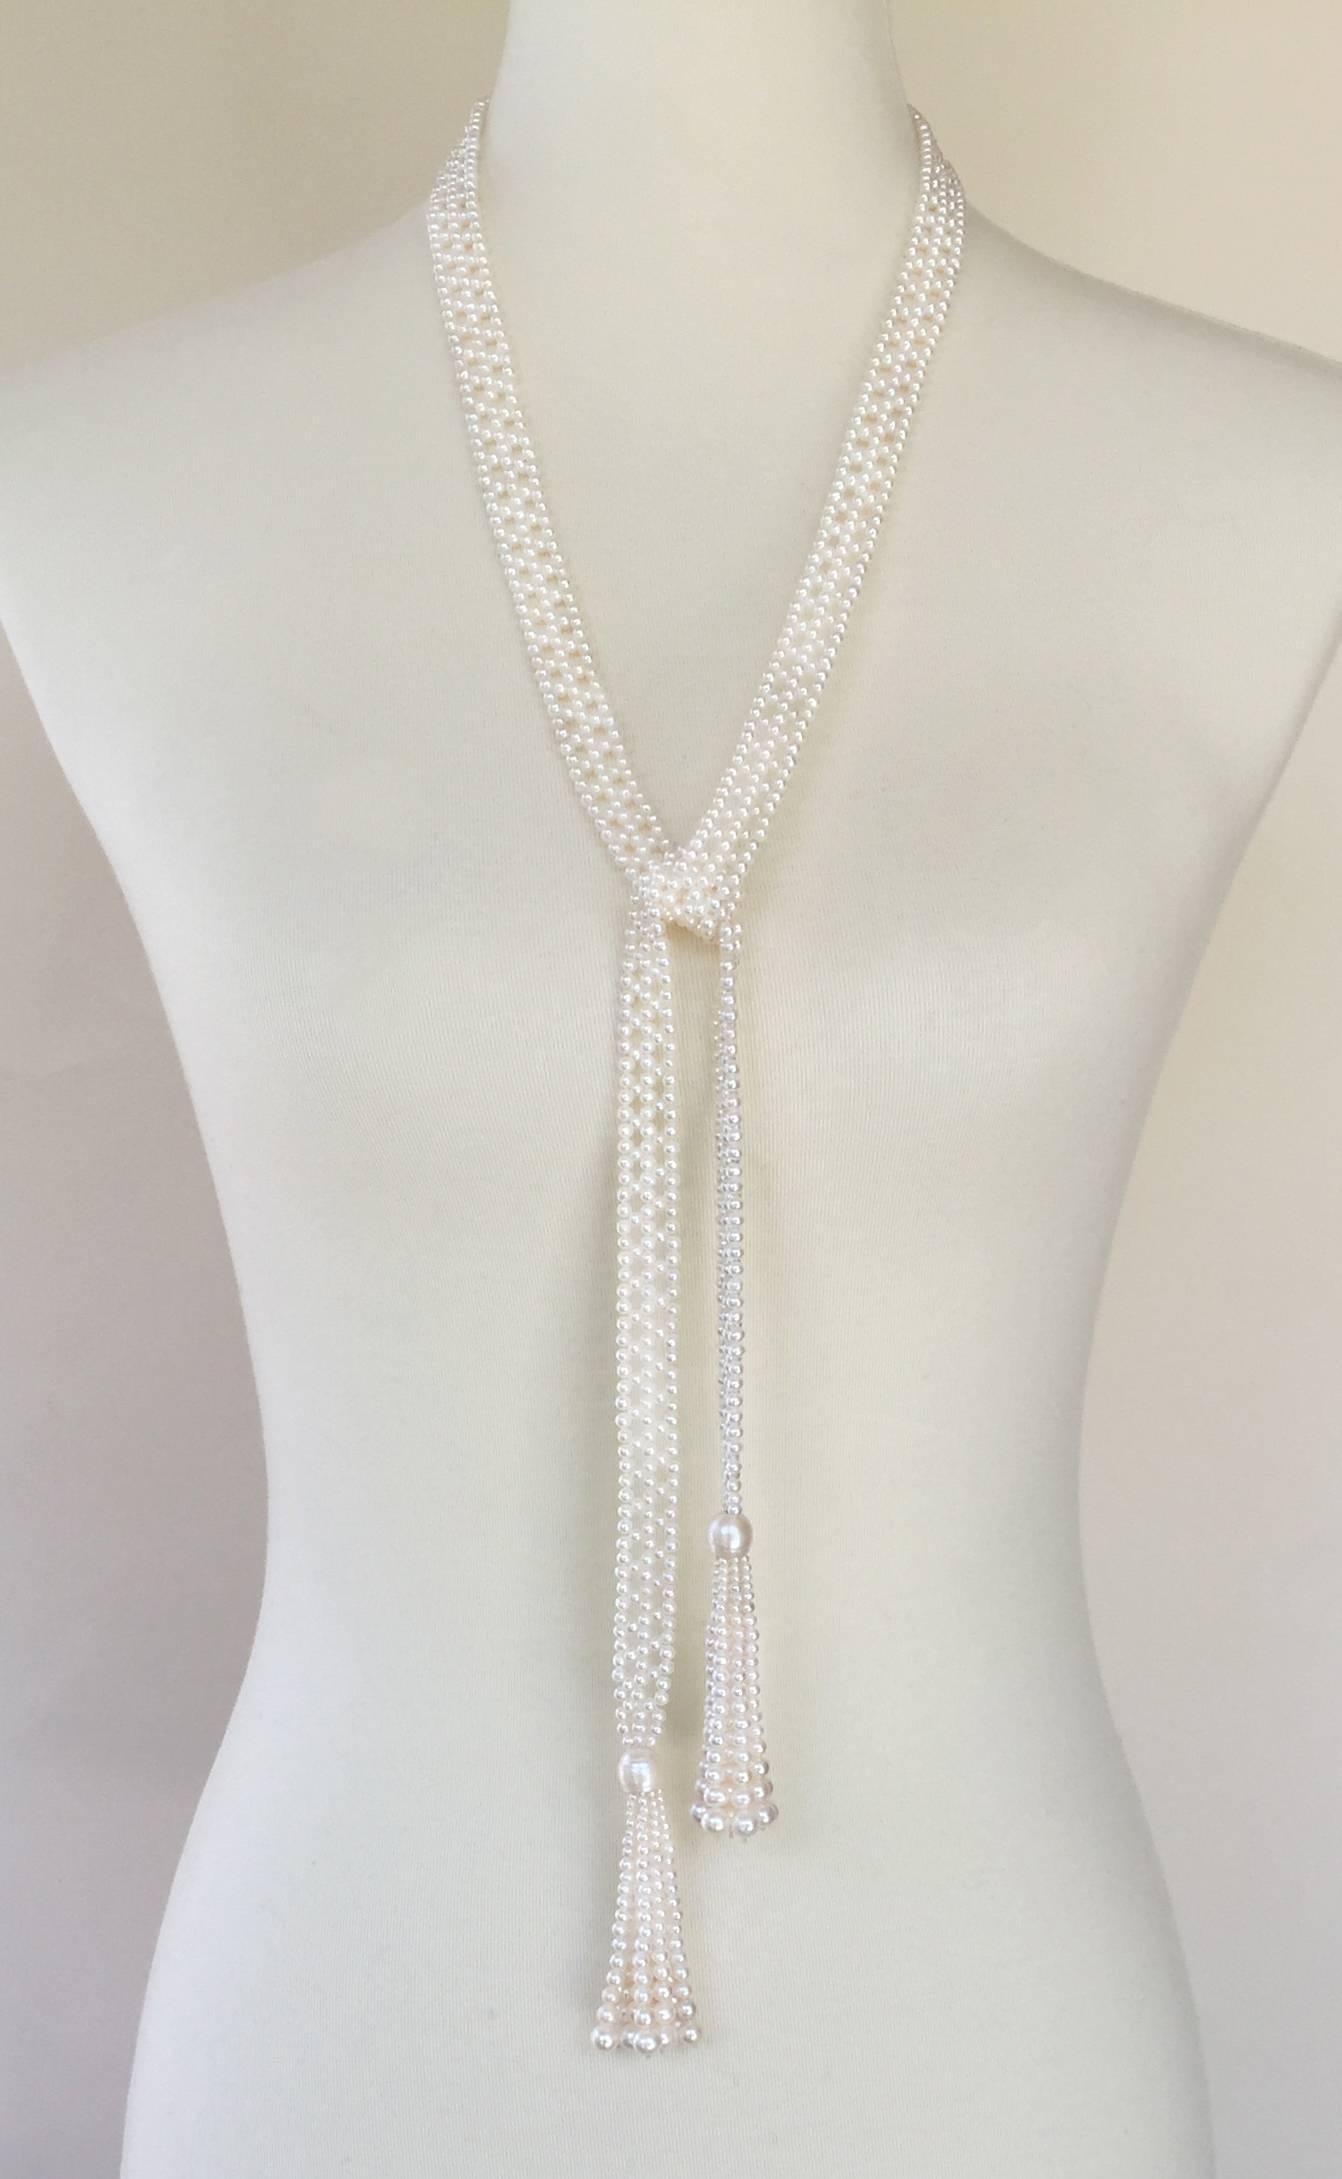 The weave of this elegant Sautoir is created with beautiful 2.5- 3 mm pearls. The lace-like design is delicate and graceful. The tassels start with a shimmering brilliant half white pearl. Each strand of the 3.2-inch tassel is composed graduated 1